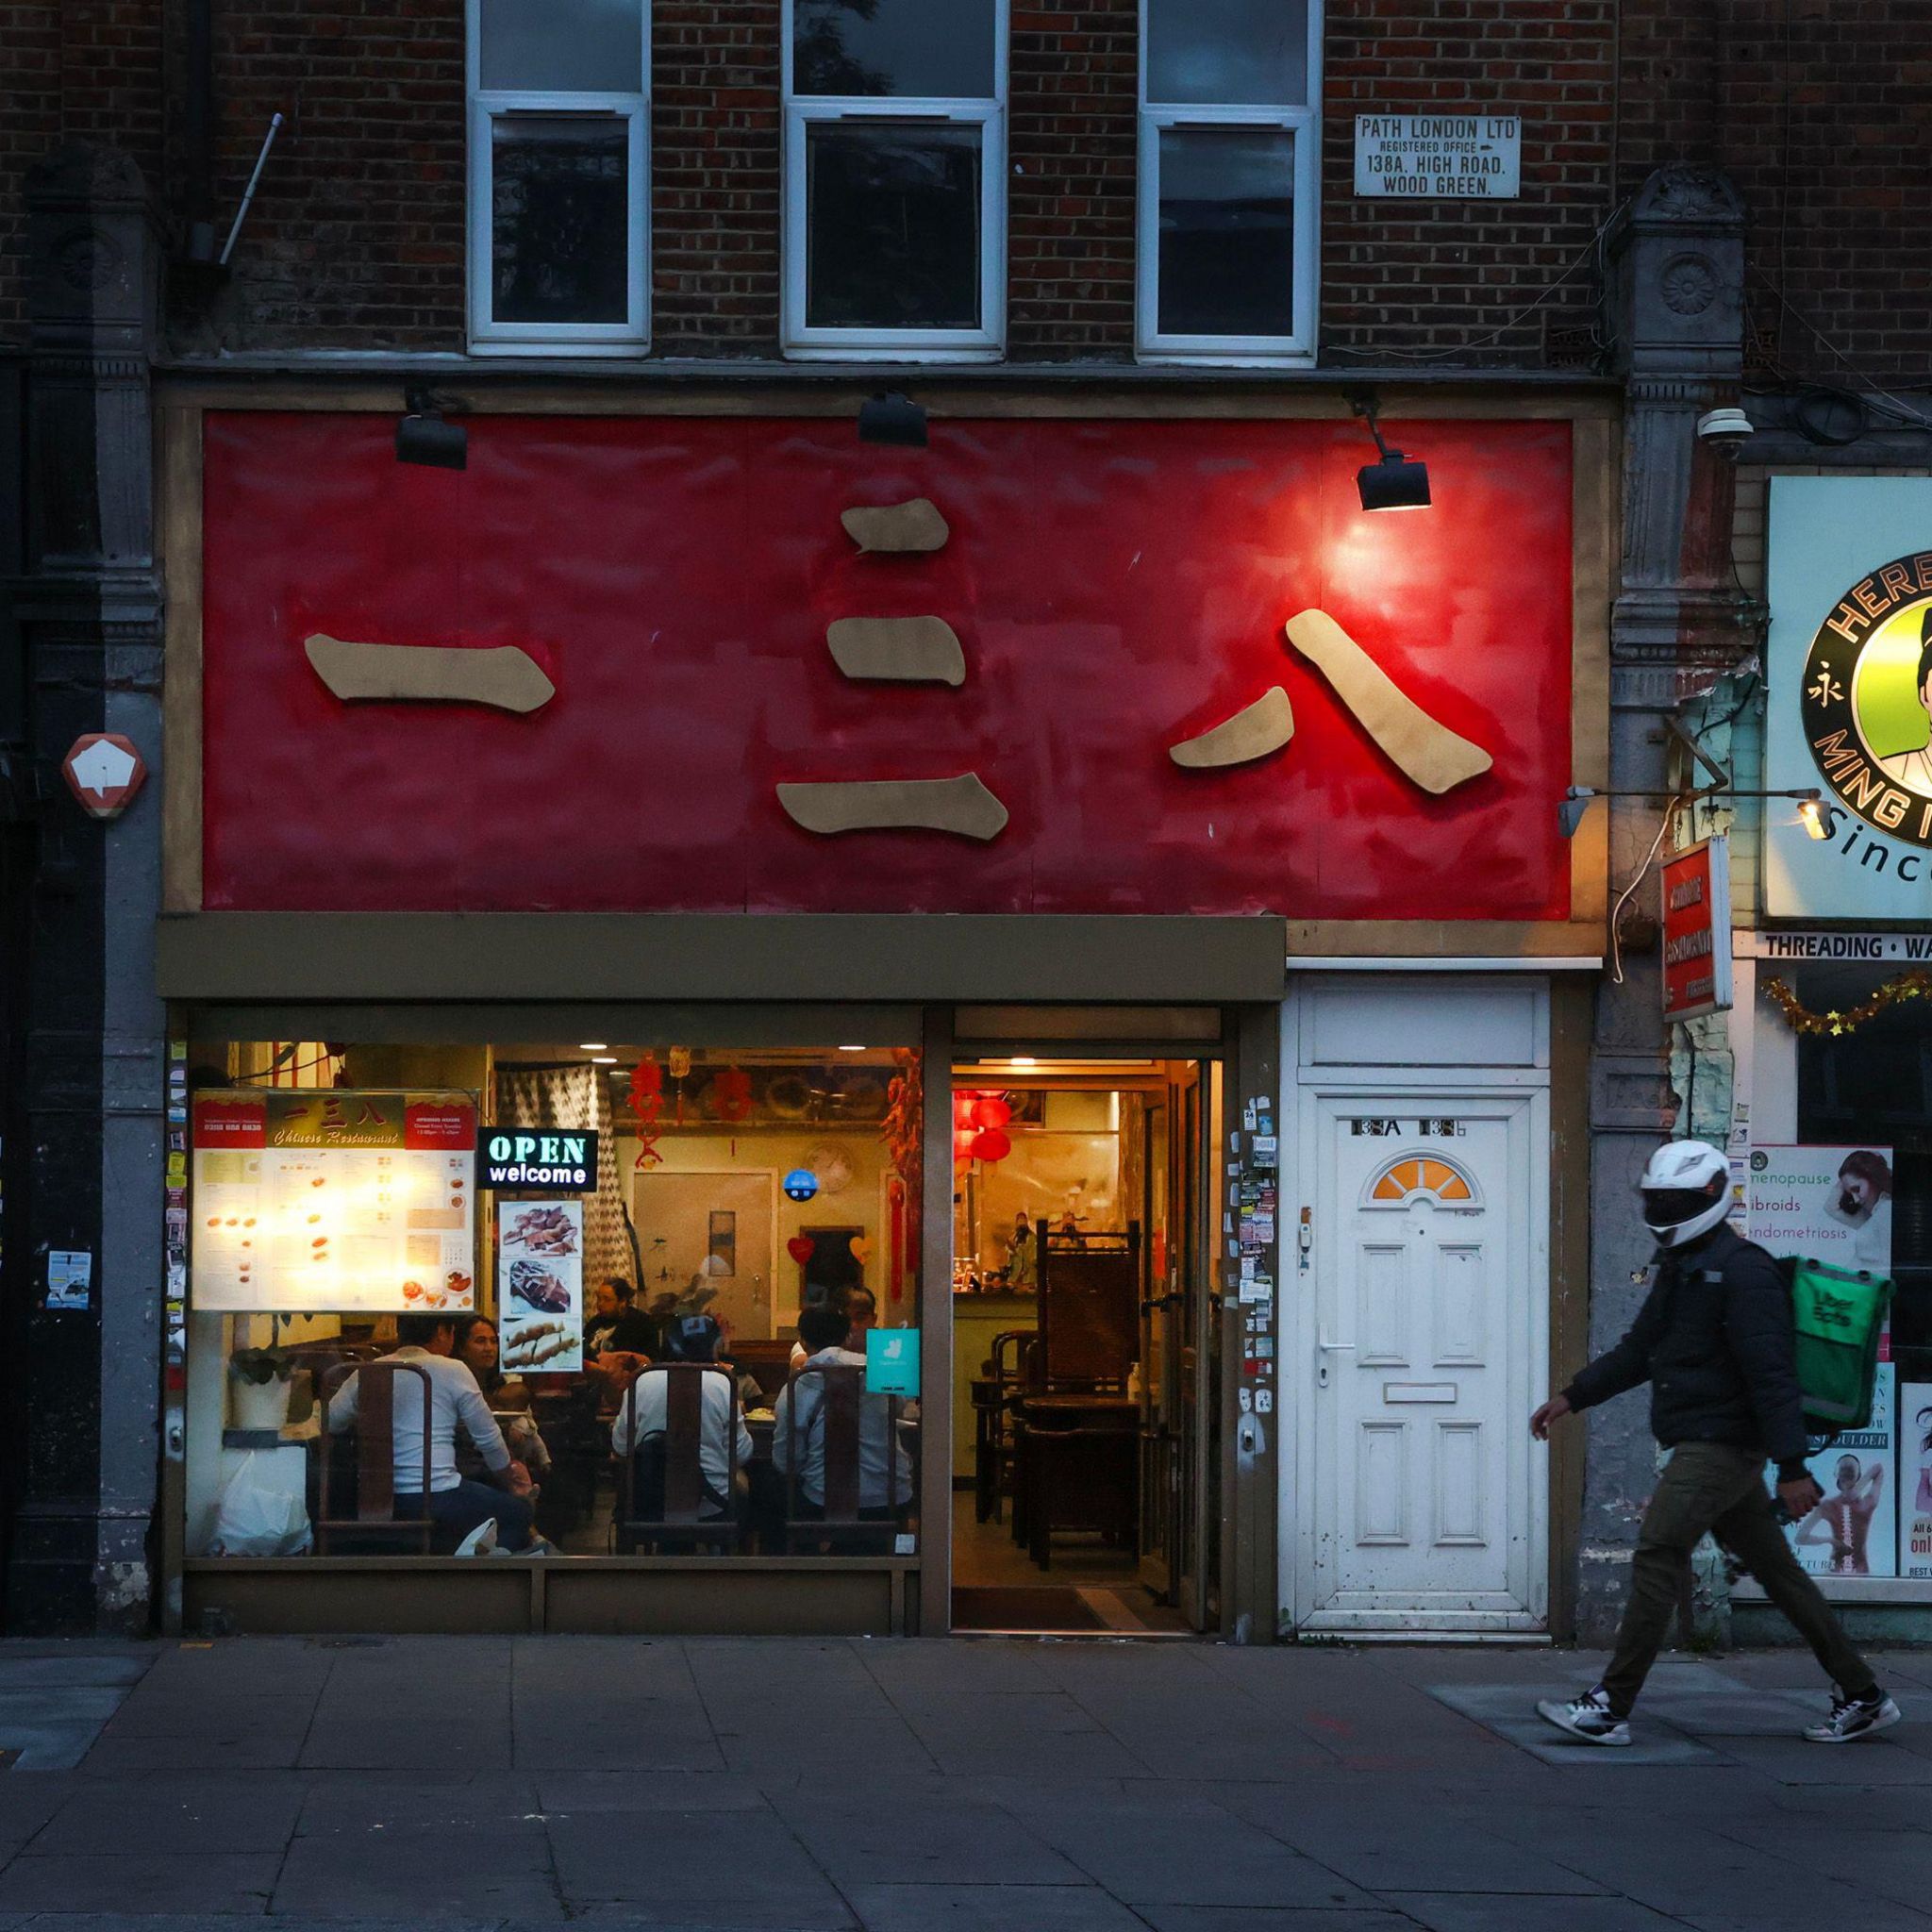 A Uber Eats delivery driver with a backpack walks past the front of a Chinese takeaway